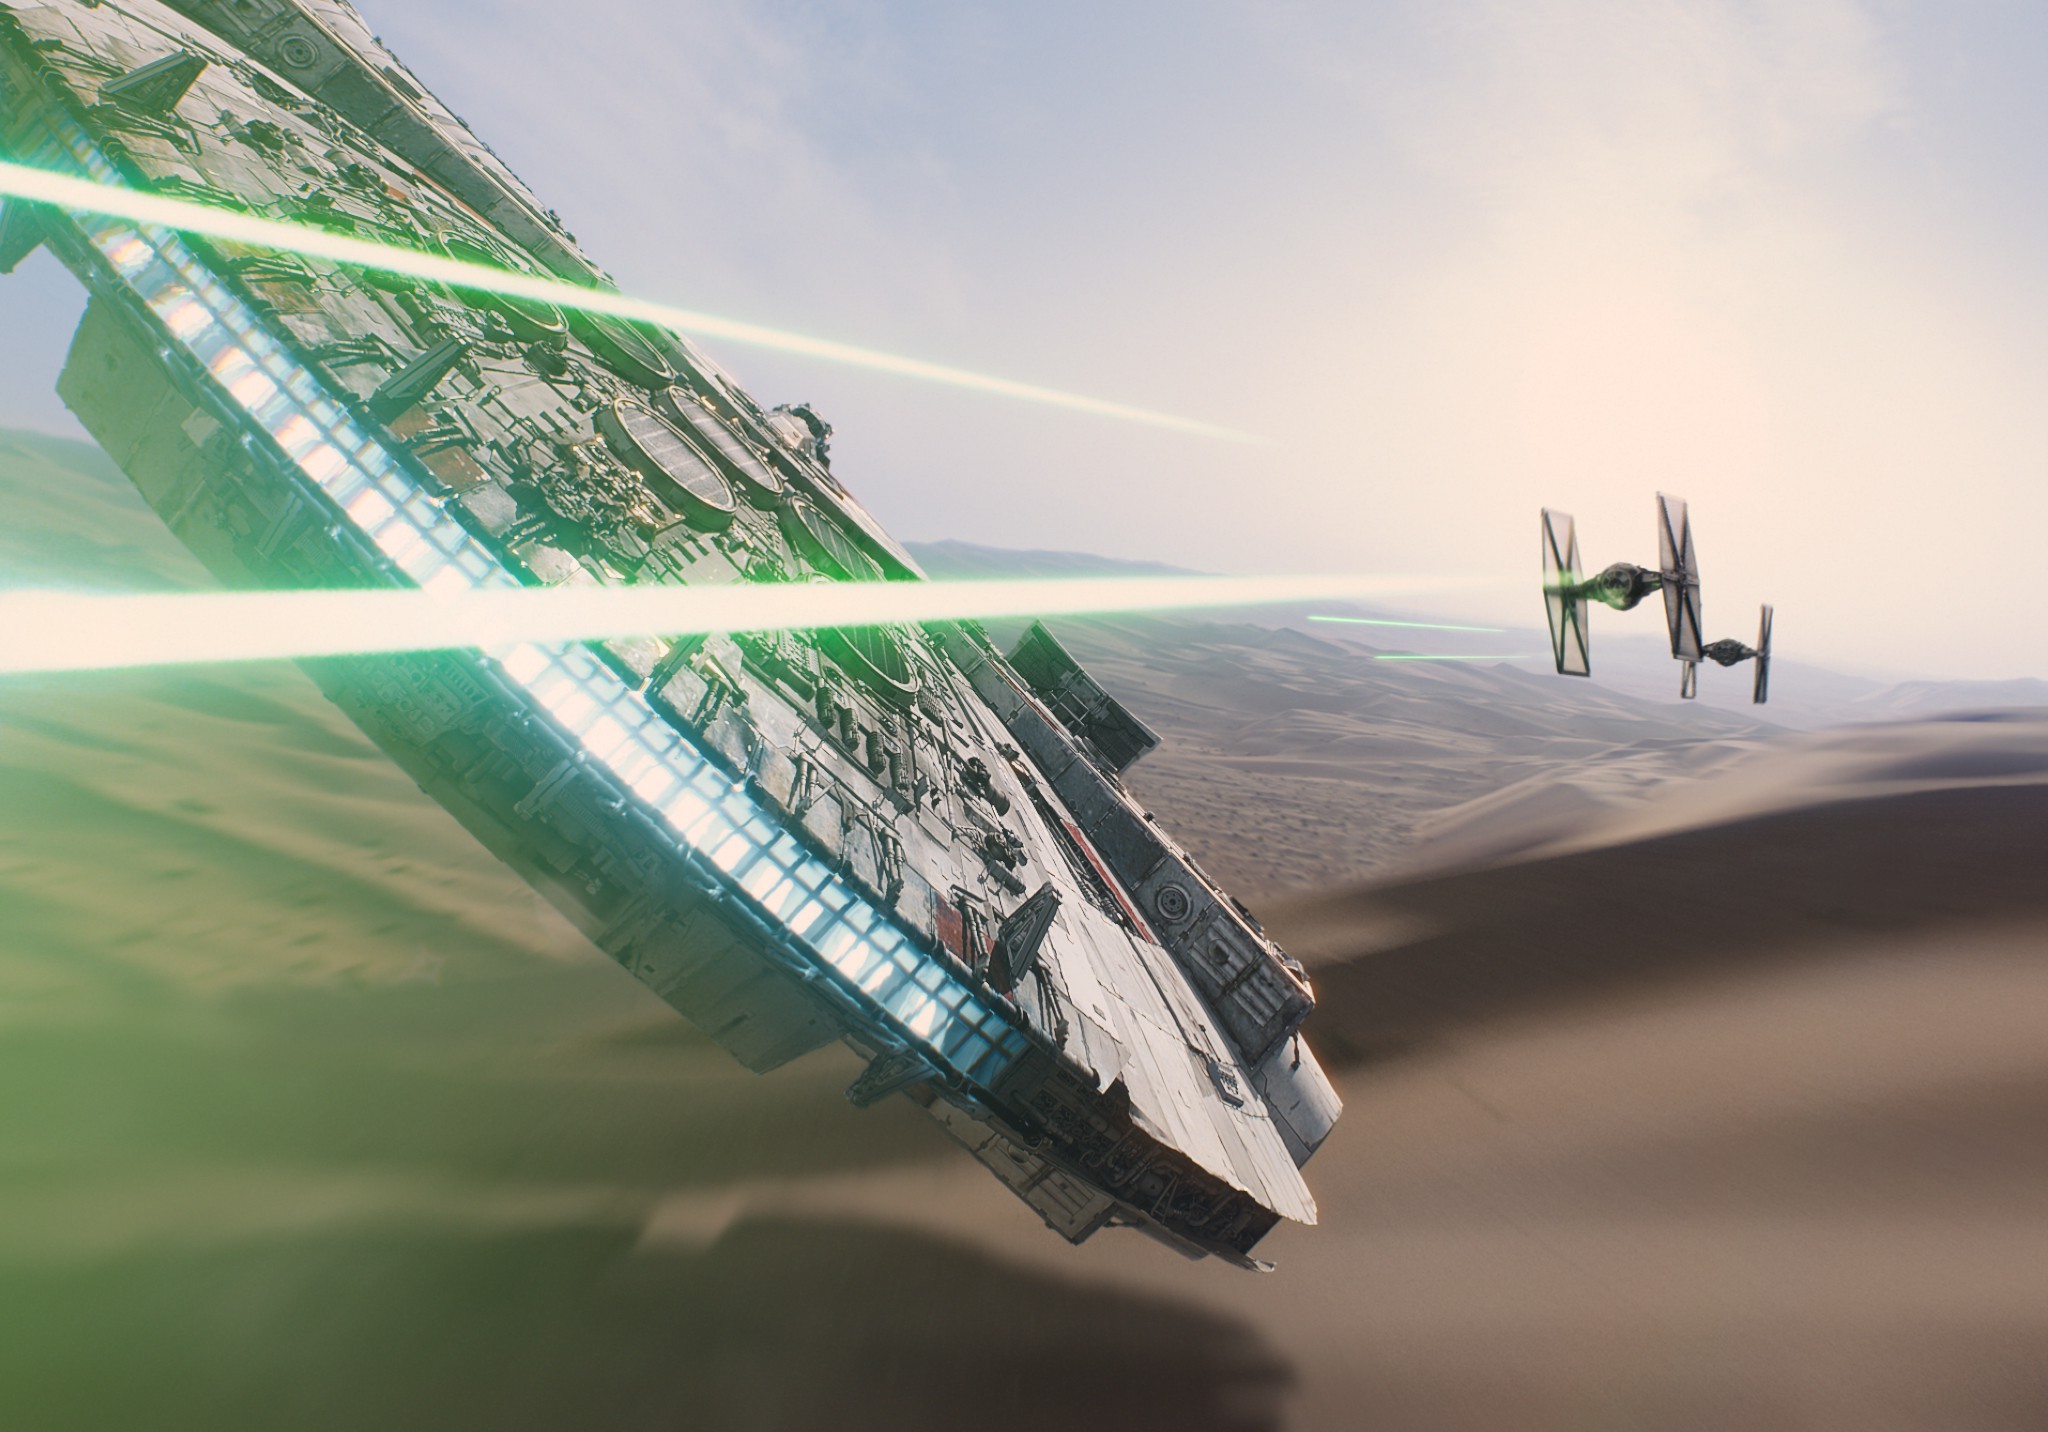 millenium falcon wallpaper,vehicle,airplane,ground attack aircraft,aircraft,aerospace engineering